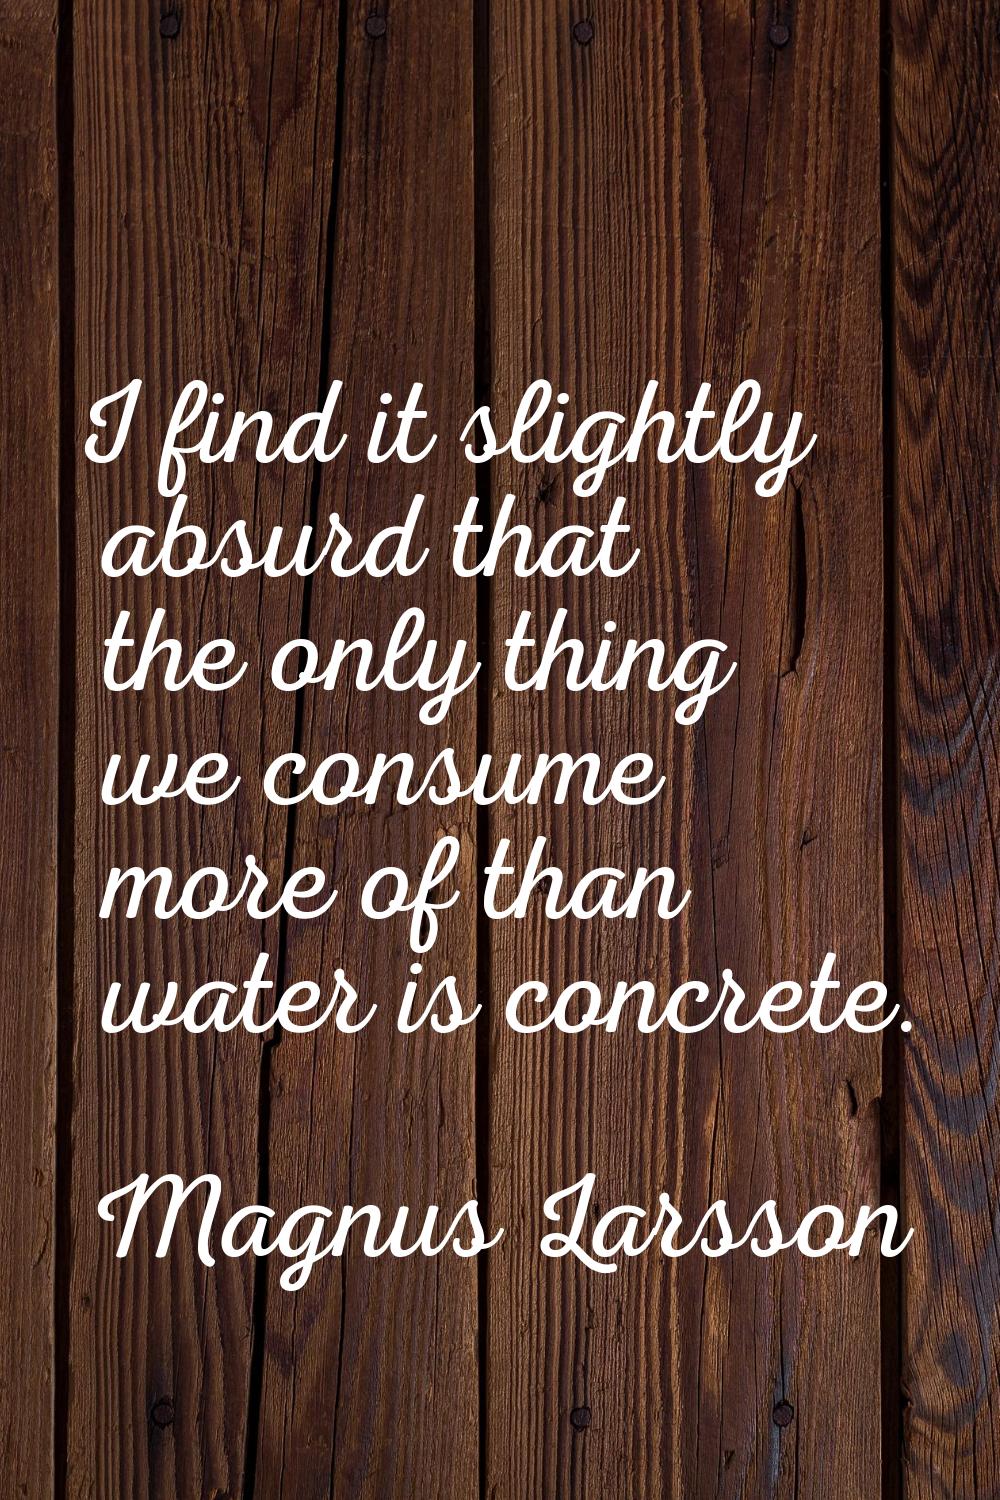 I find it slightly absurd that the only thing we consume more of than water is concrete.